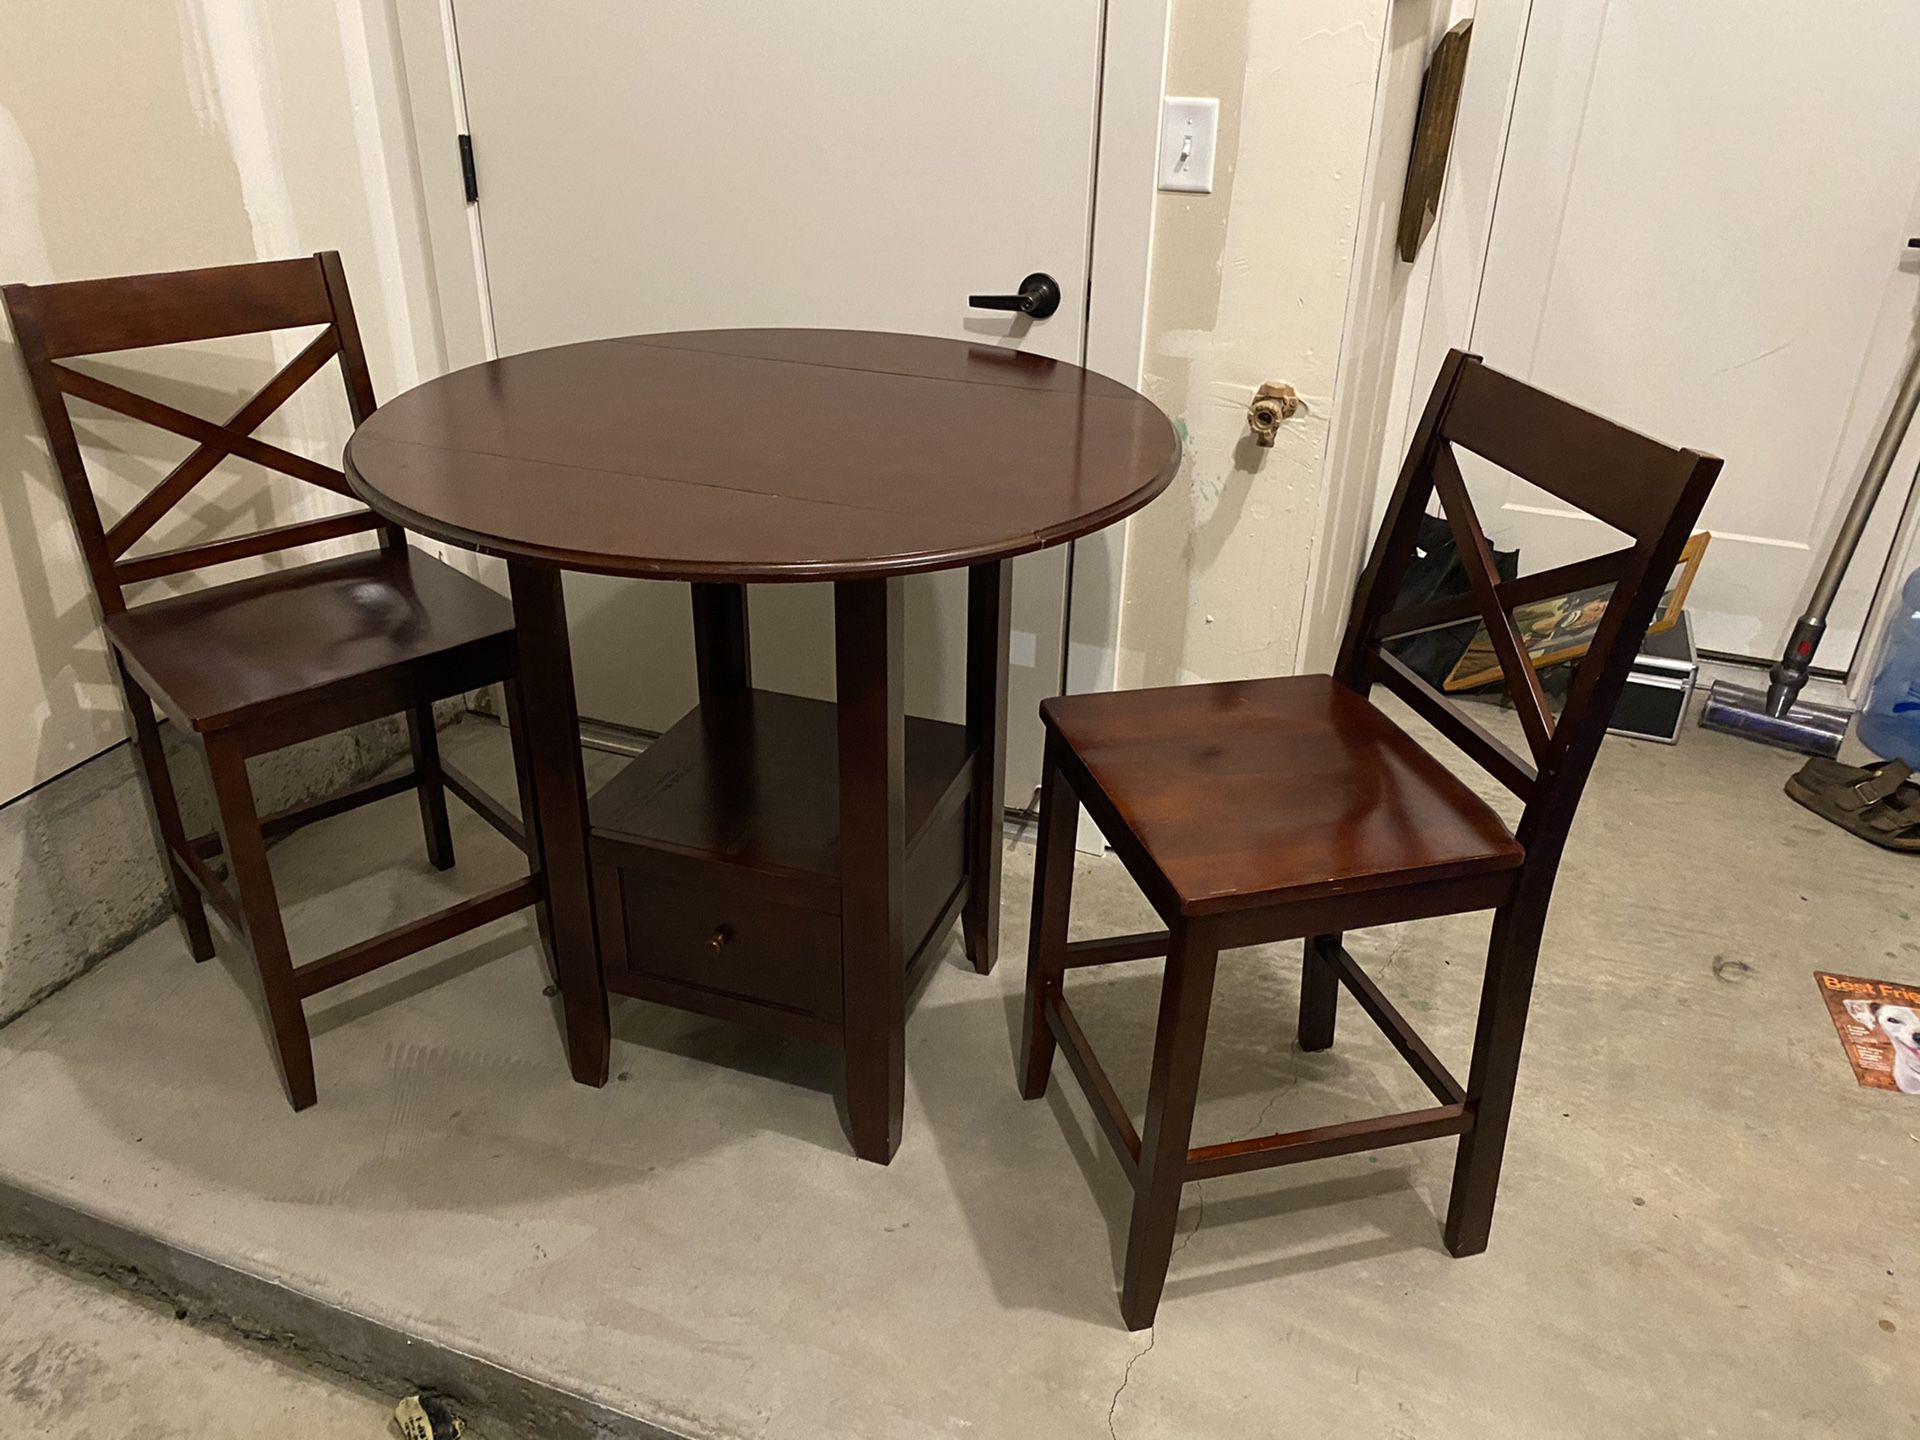 Pub table for sale (as is) throwing in stools for free